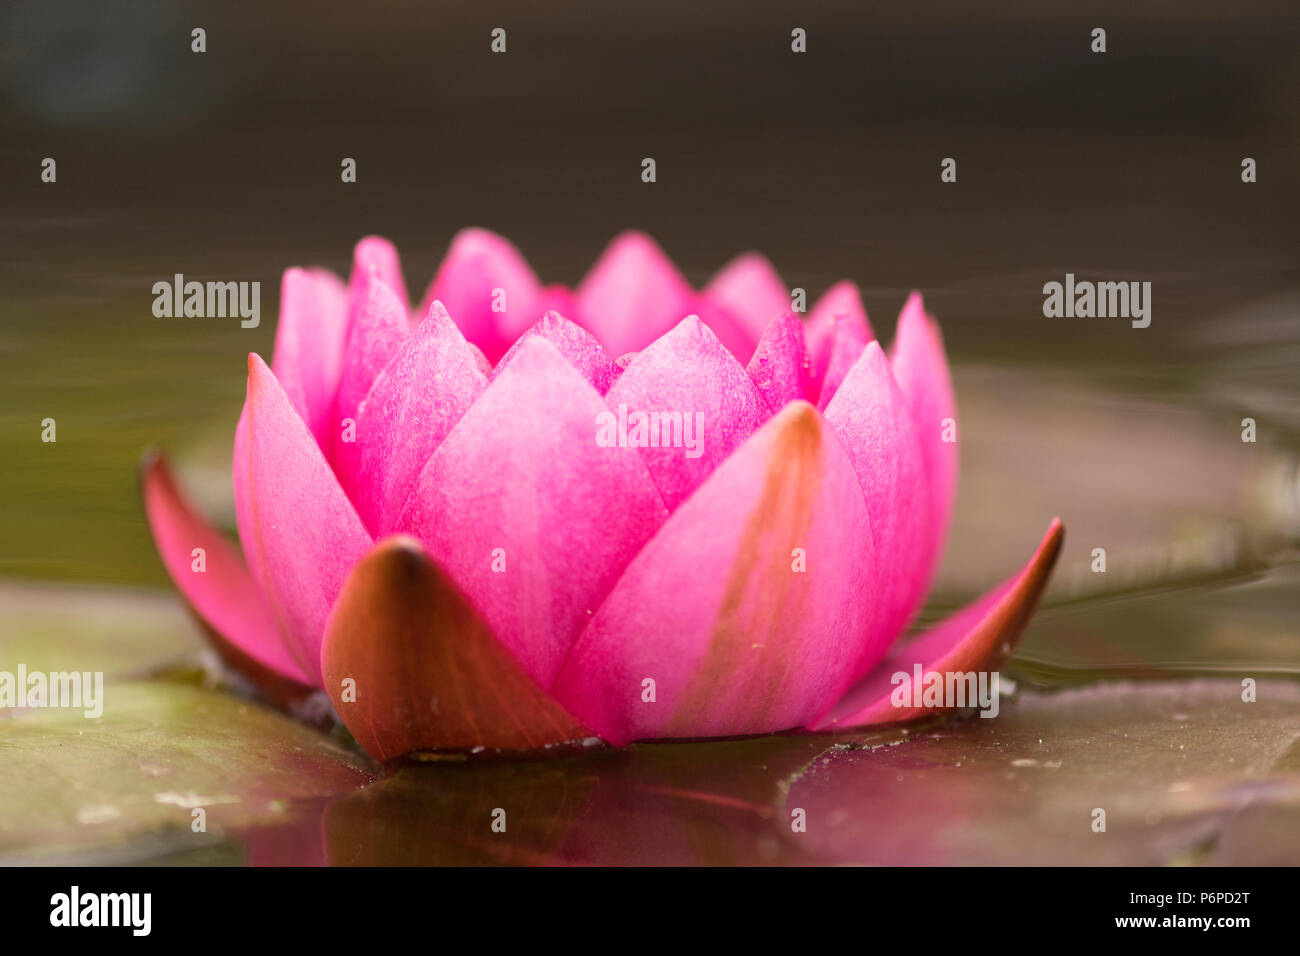 Close-up of a beautiful pink water lily, floating on water Stock Photo